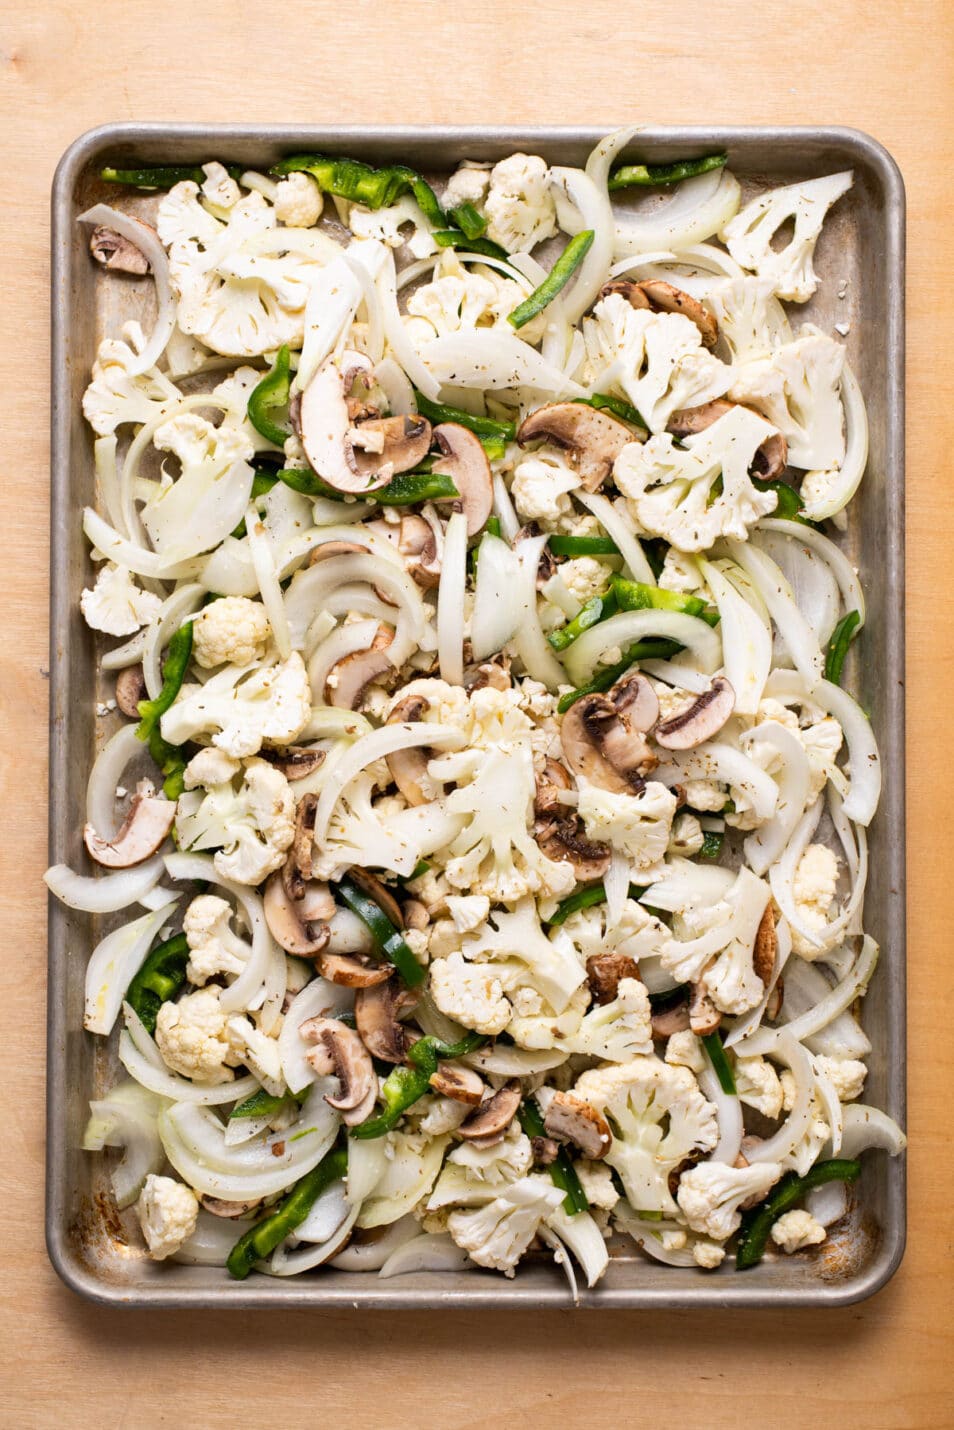 Chopped peppers, onions, mushrooms, and cauliflower on a baking sheet.